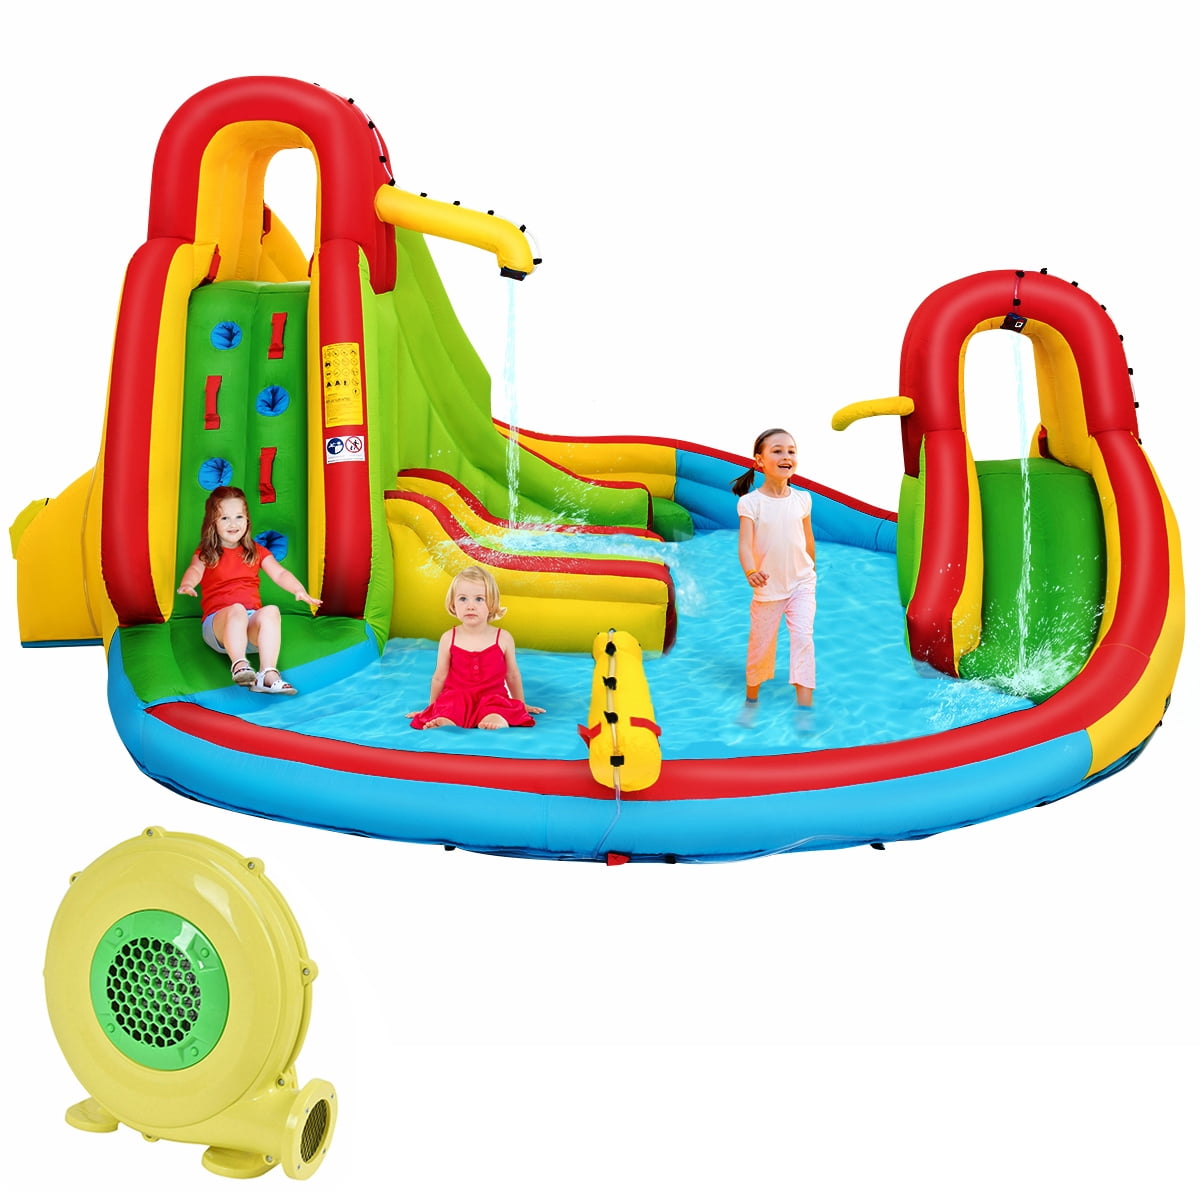 Plus Boogie Inflatable Slip N Slide Pool Children This Wave Crasher Kiddie Blow Up Above Ground Long Water Slide is Great for Toddlers Aqua Splash to Have Outdoor Water Fun W/All Family. Kids 